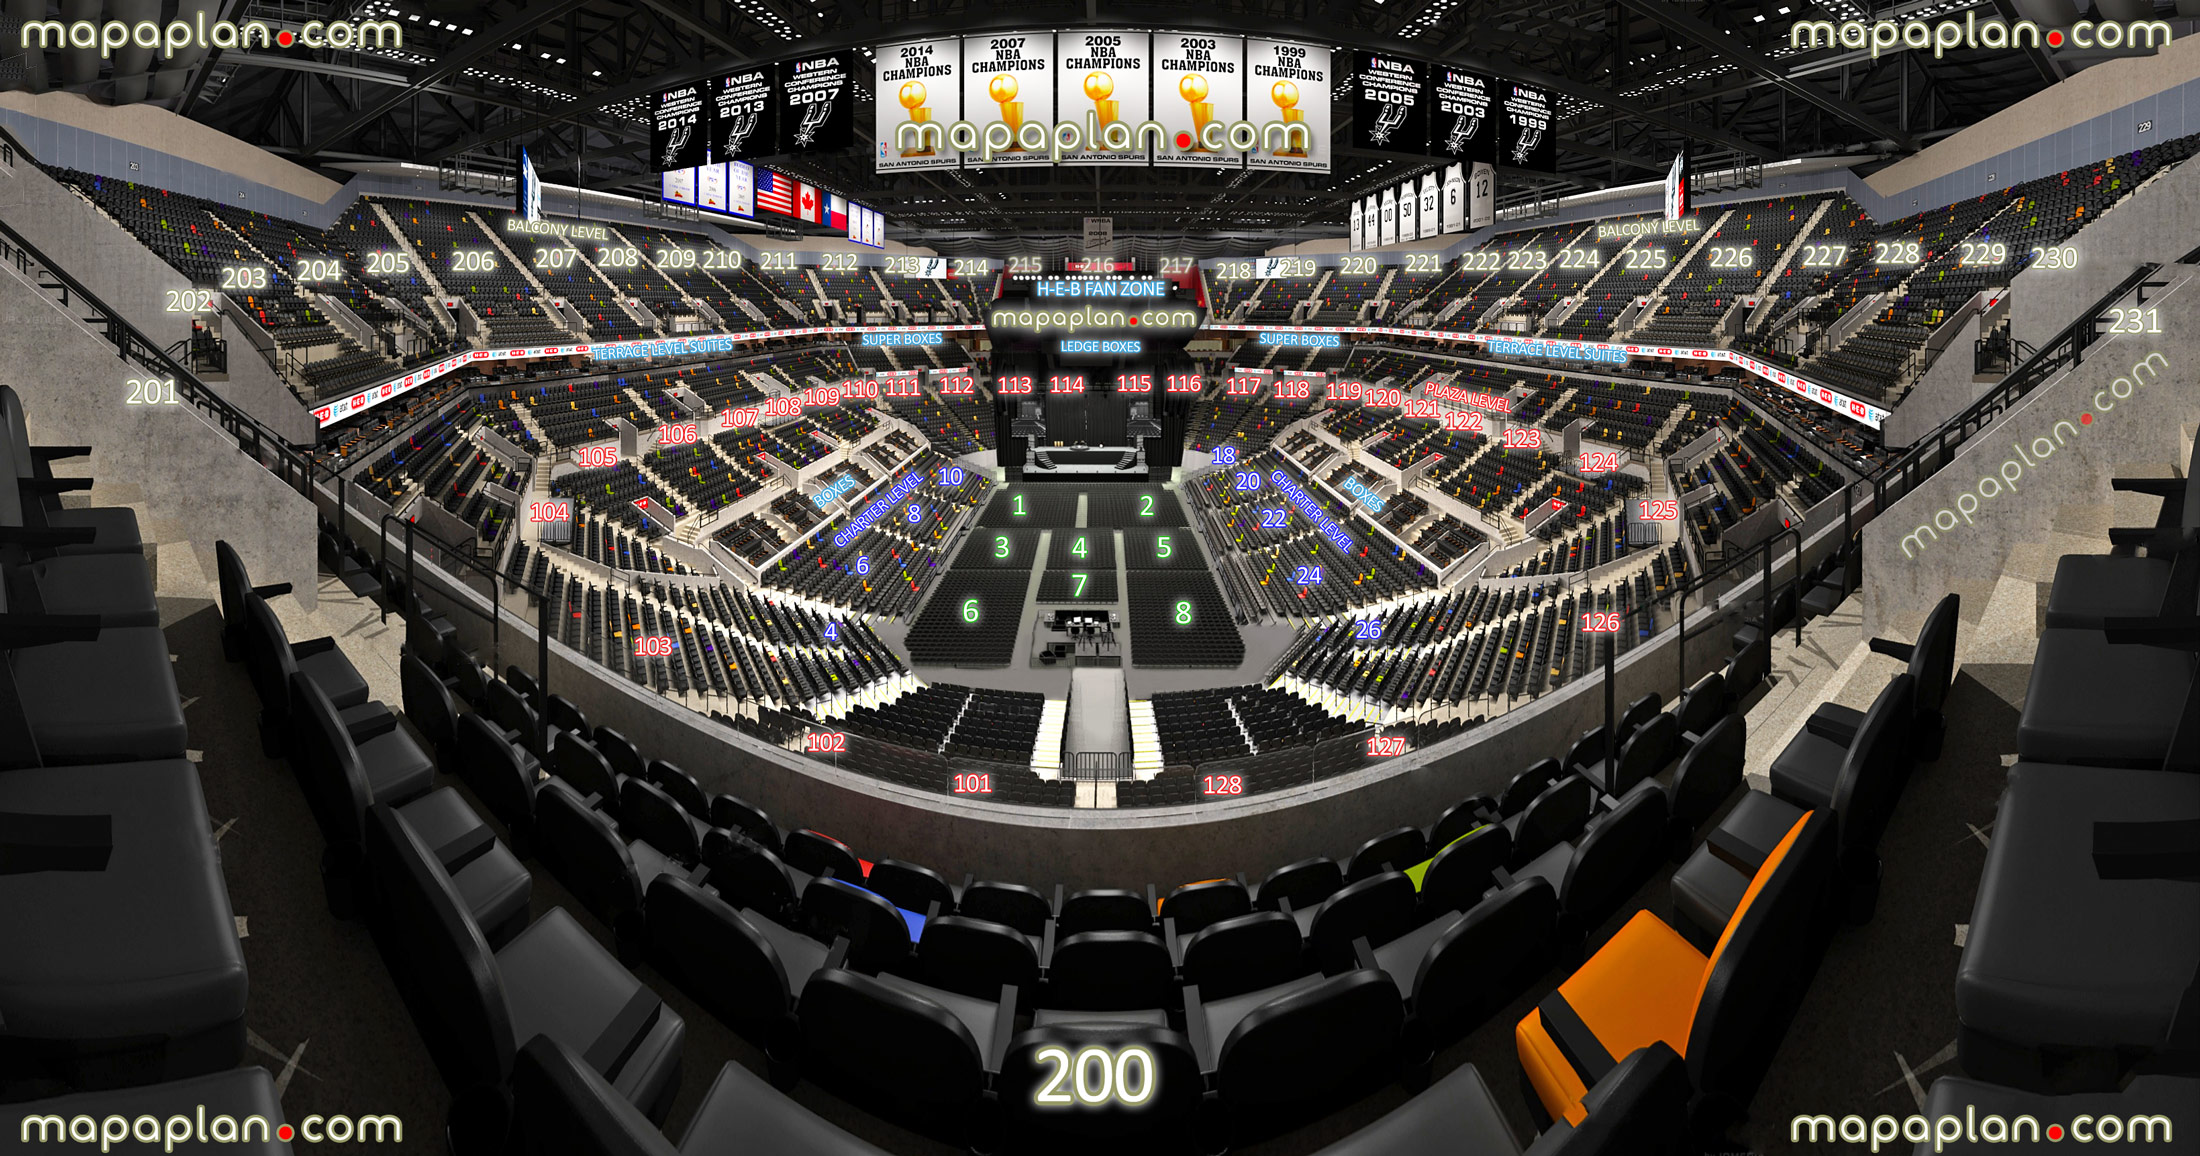 view section 200 row 5 seat 8 virtual venue 3d interactive inside stage review tour concert interior picture charter plaza terrace balcony levels suites floor 1 2 3 4 5 6 7 8 San Antonio AT&T Center seating chart